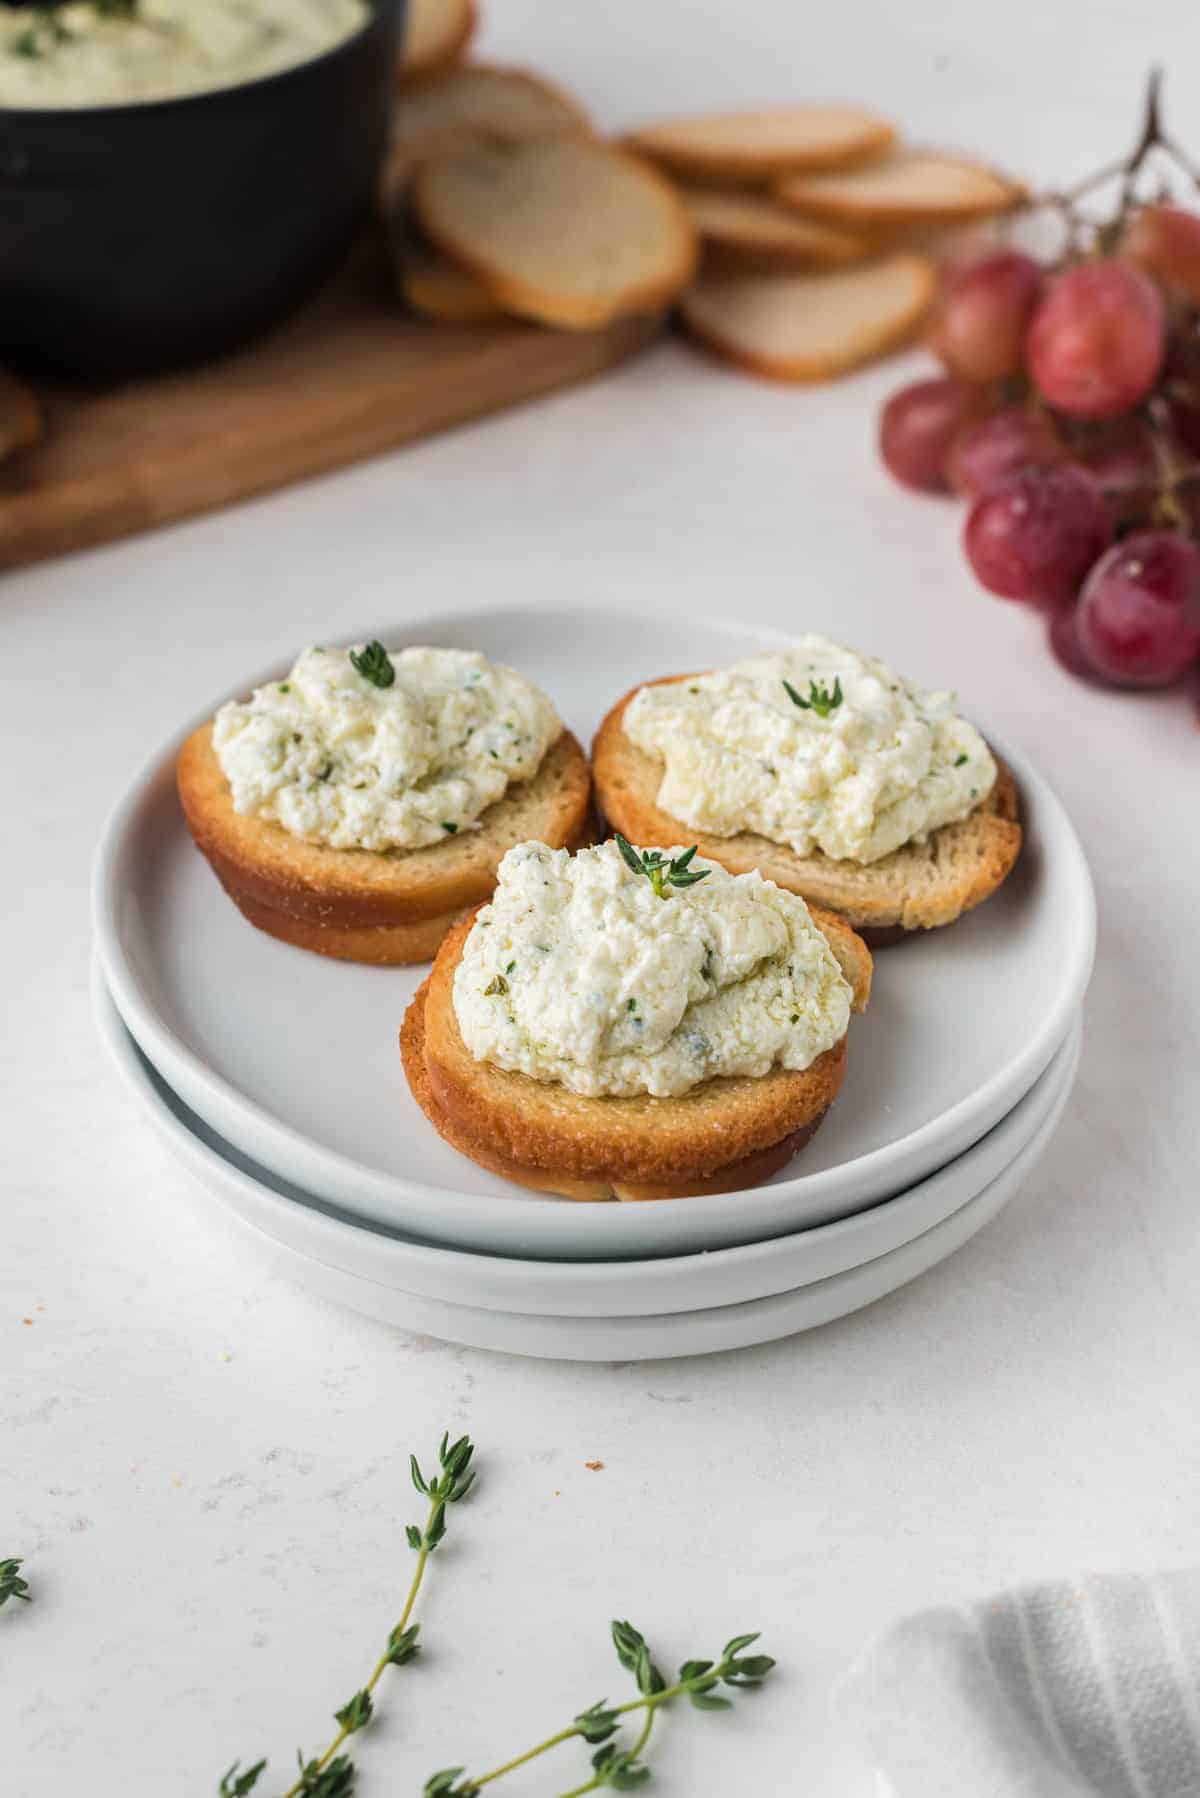 Goat cheese spread onto round toasts.